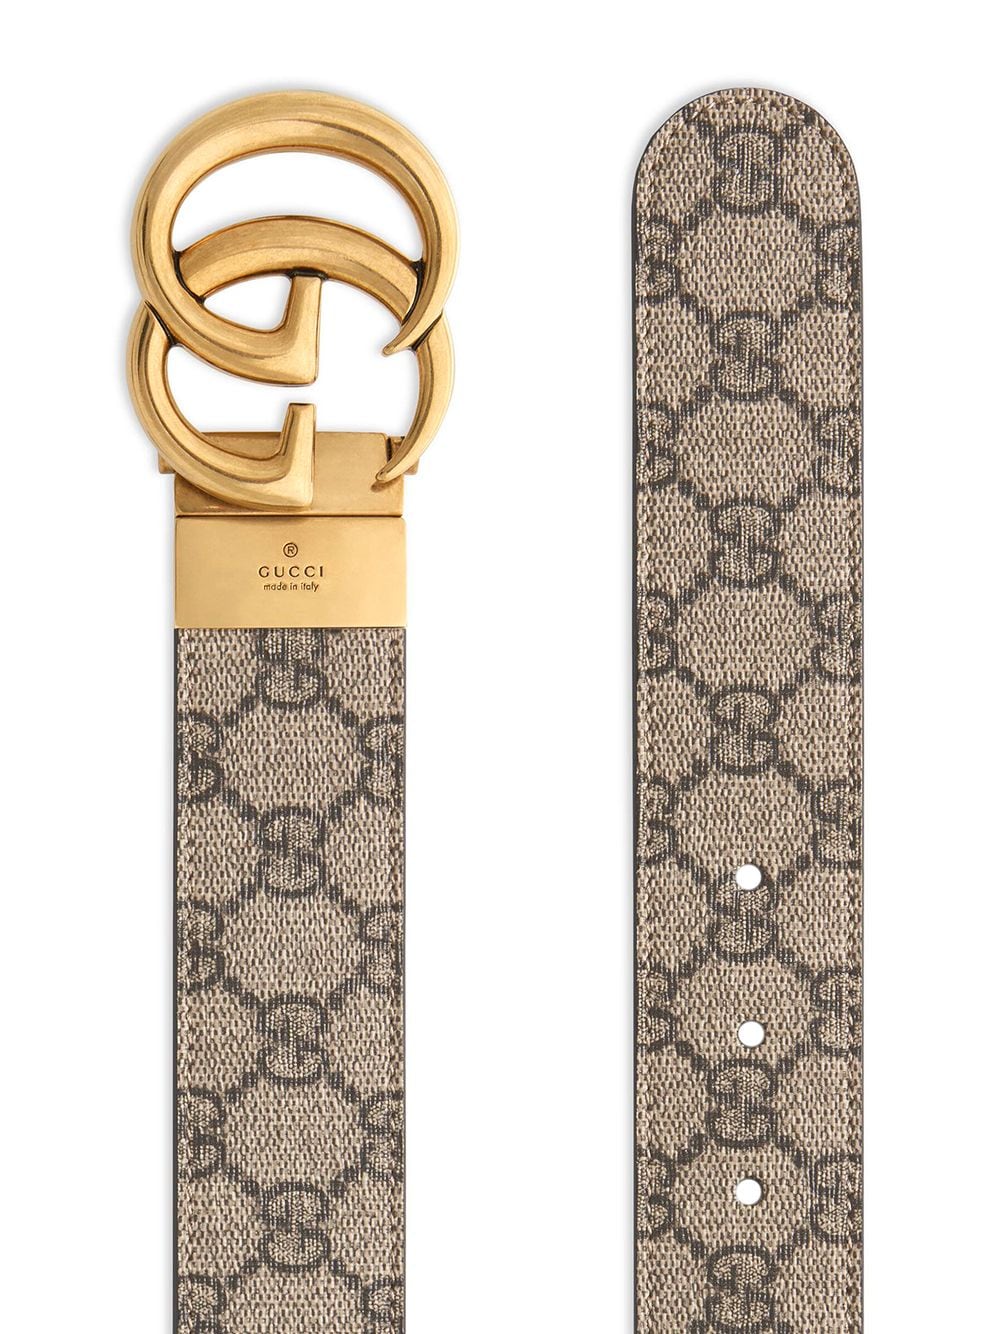 How to wear the Gucci GG Marmont Reversible Belt? Statement Luxury🤎 #gucci  #guccibelt #guccimarmont 